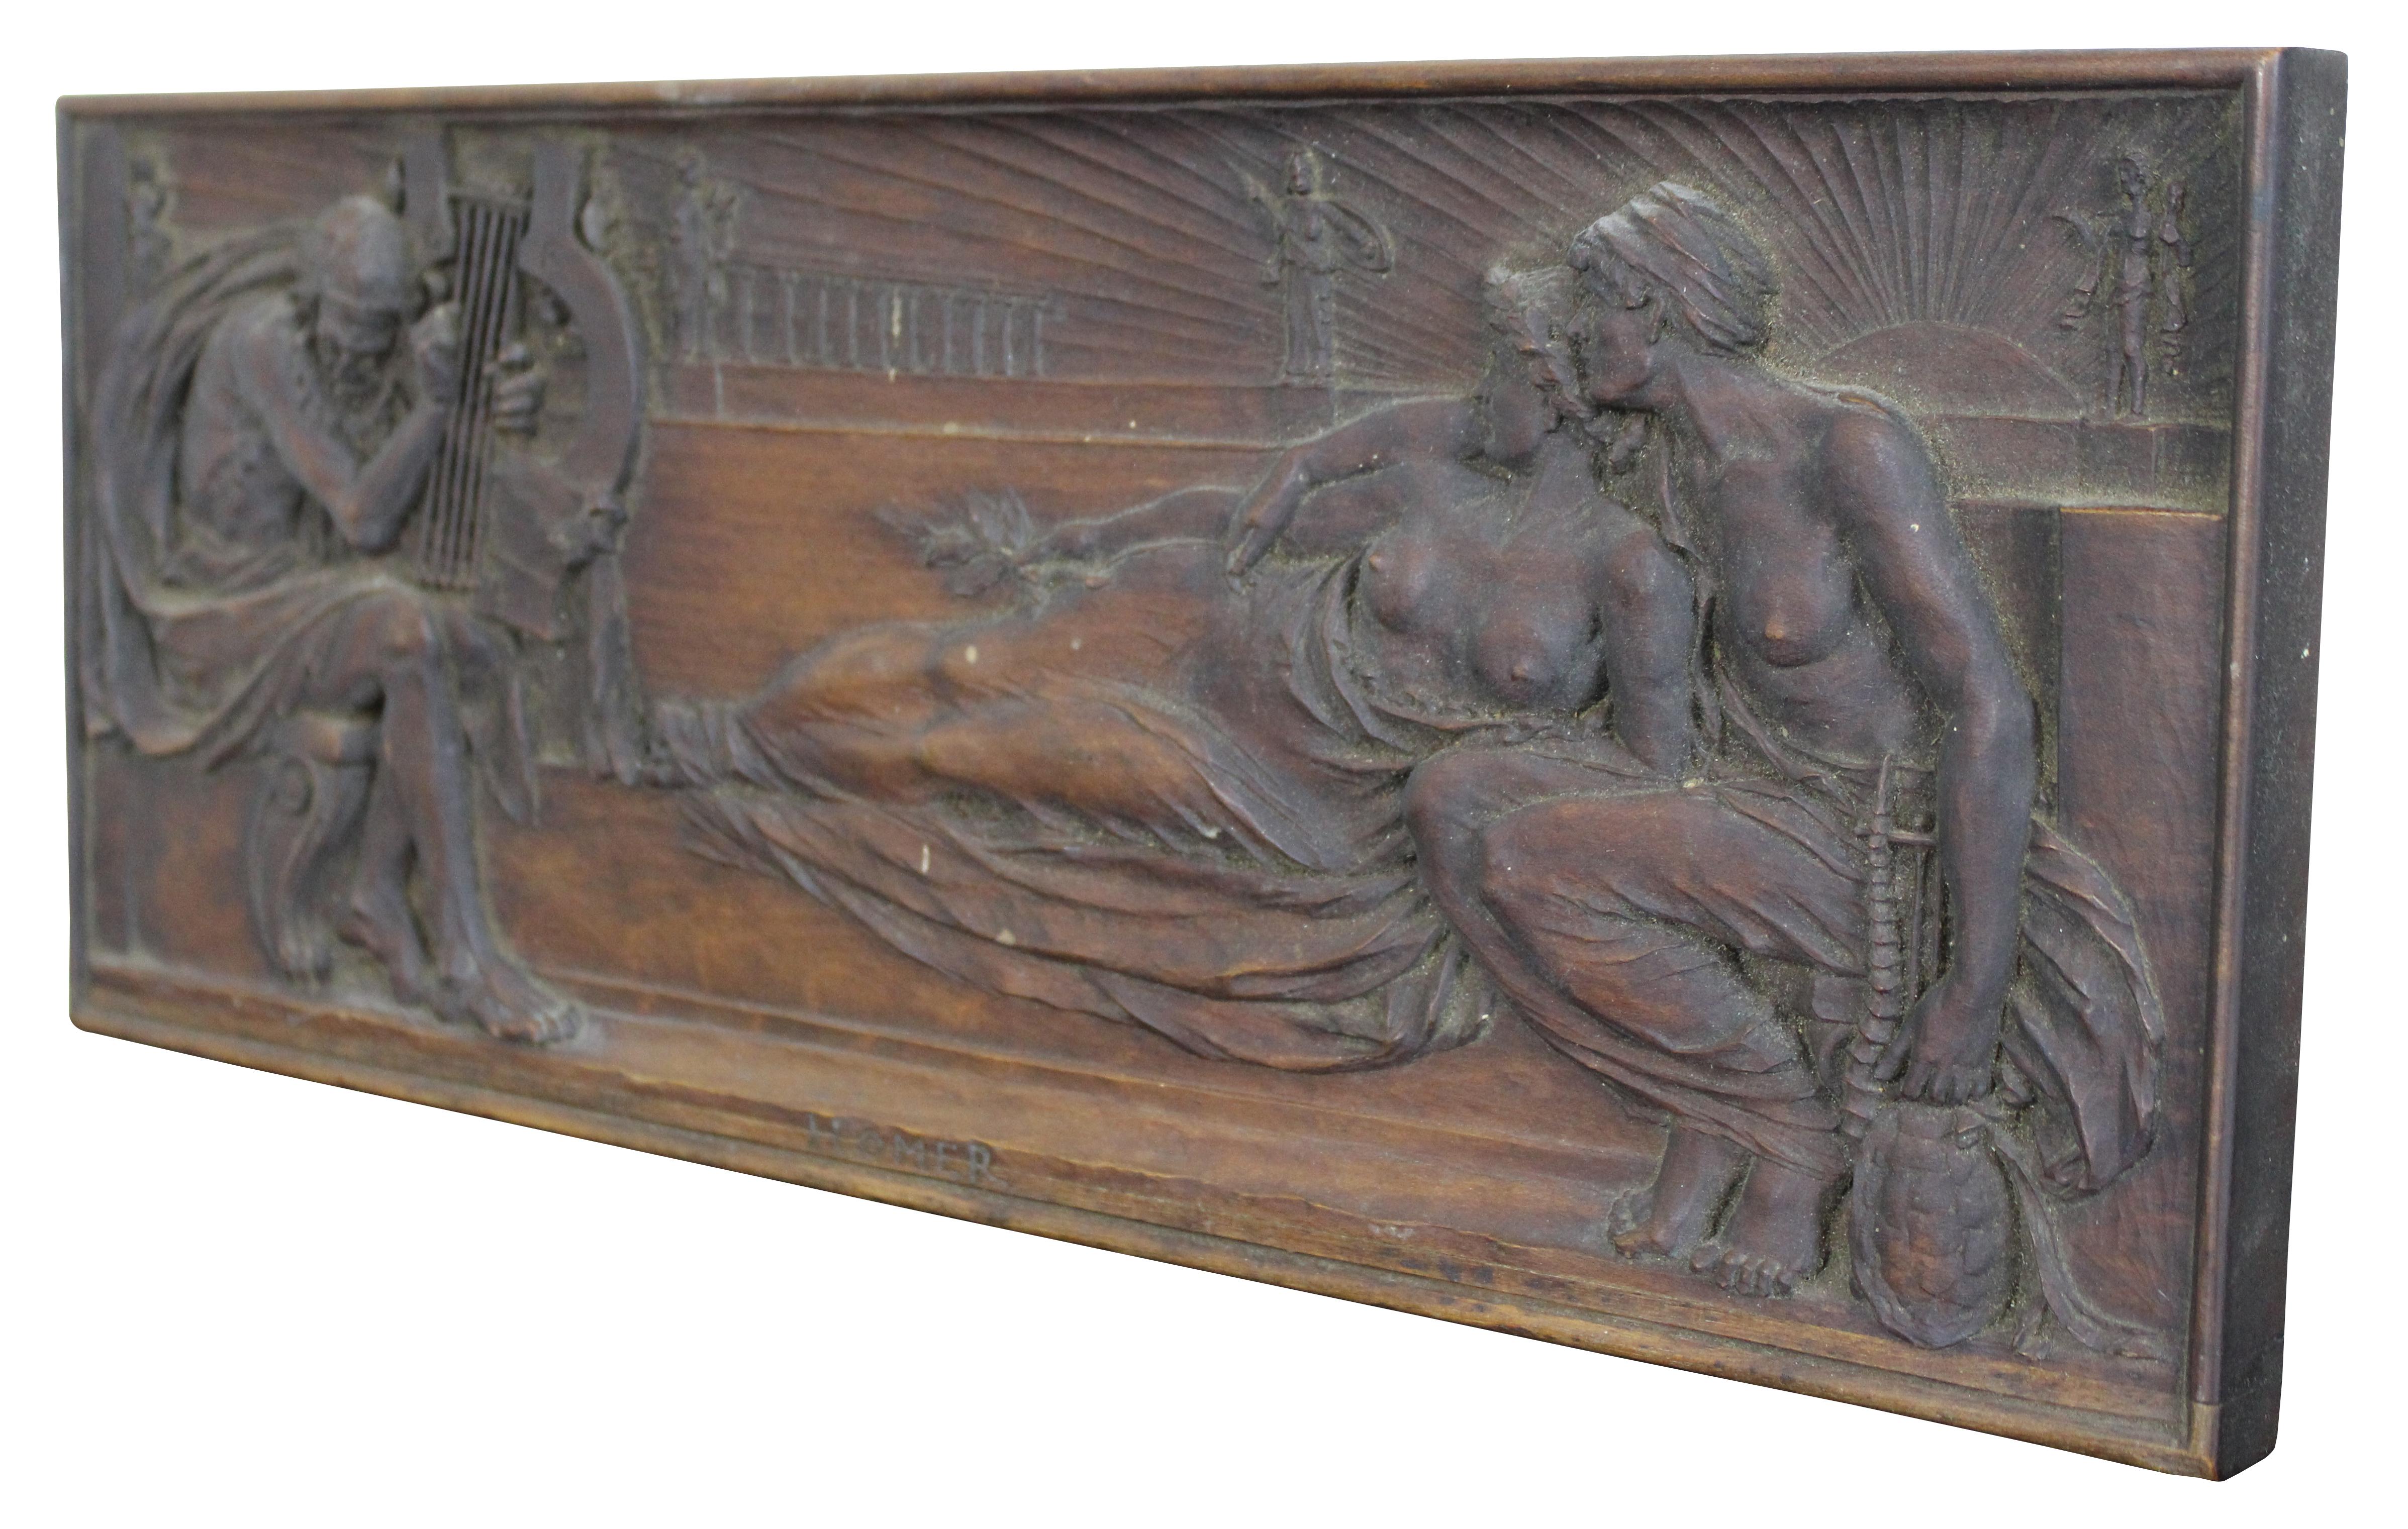 Rare antique carved wood reproduction of a clay relief sculpture by Harry Bates, depicting the Greek poet Homer, playing the lyre for two Muses. “The famed Greek epic poet Homer is said to have flourished around 700 B.C. Credited to him are the